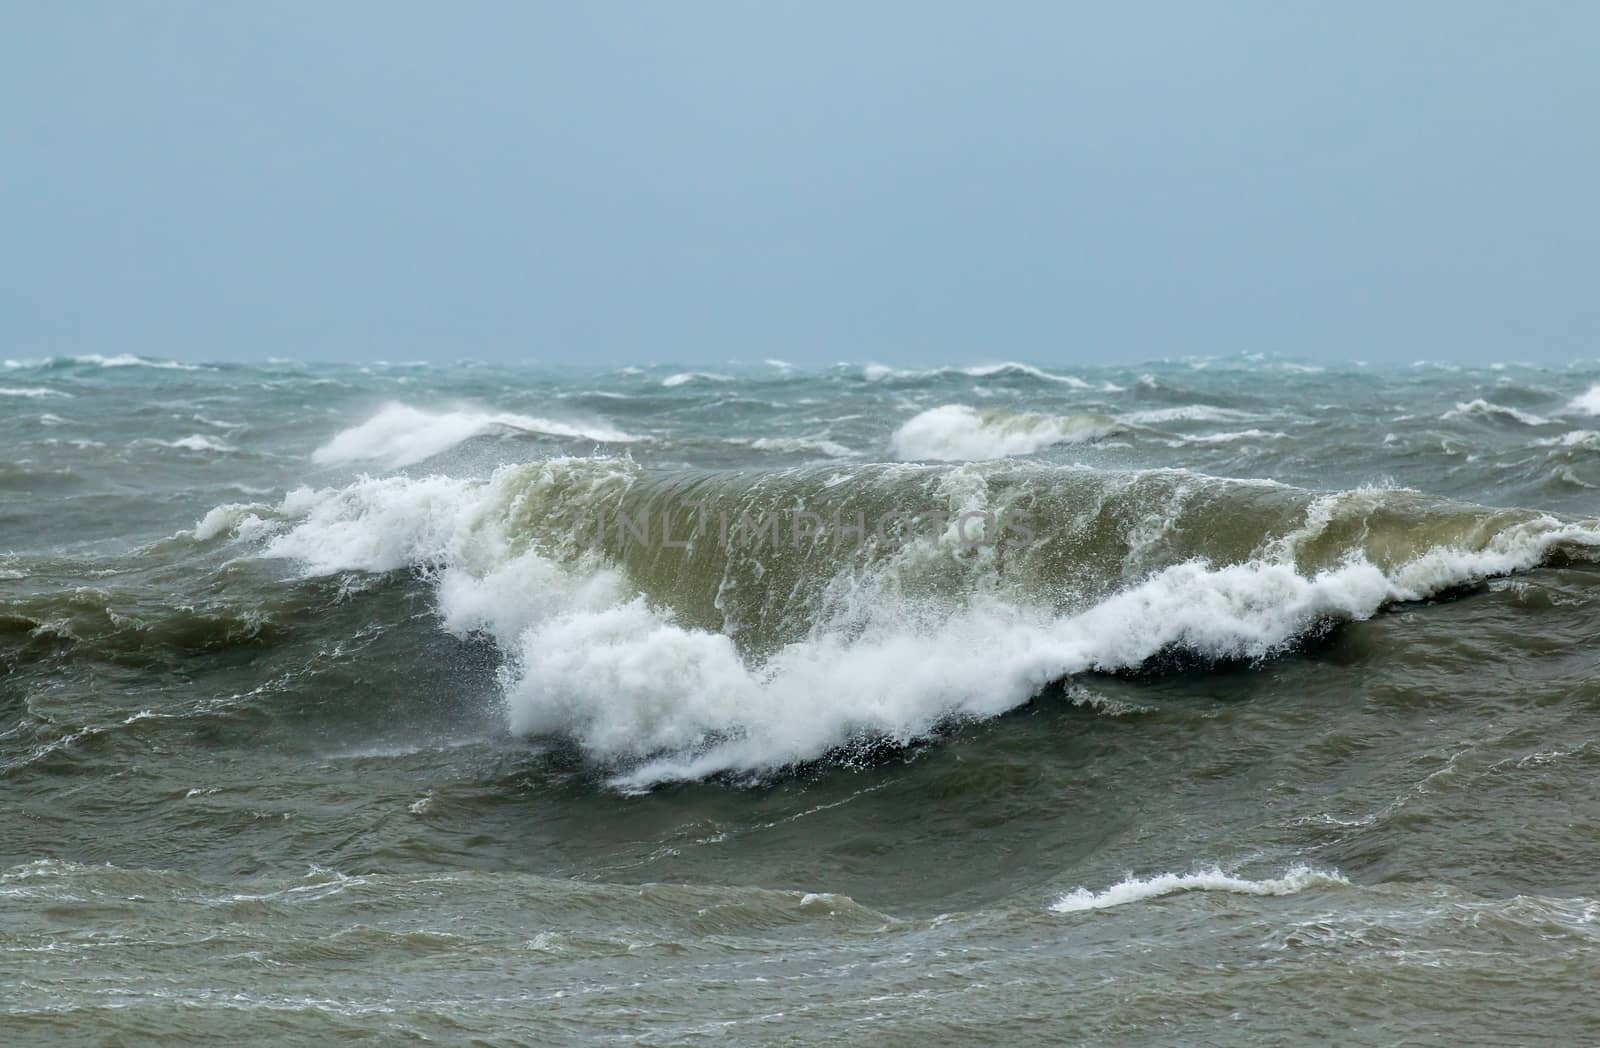 Rough sea with crashing waves in English Channel off Seaford in East Sussex